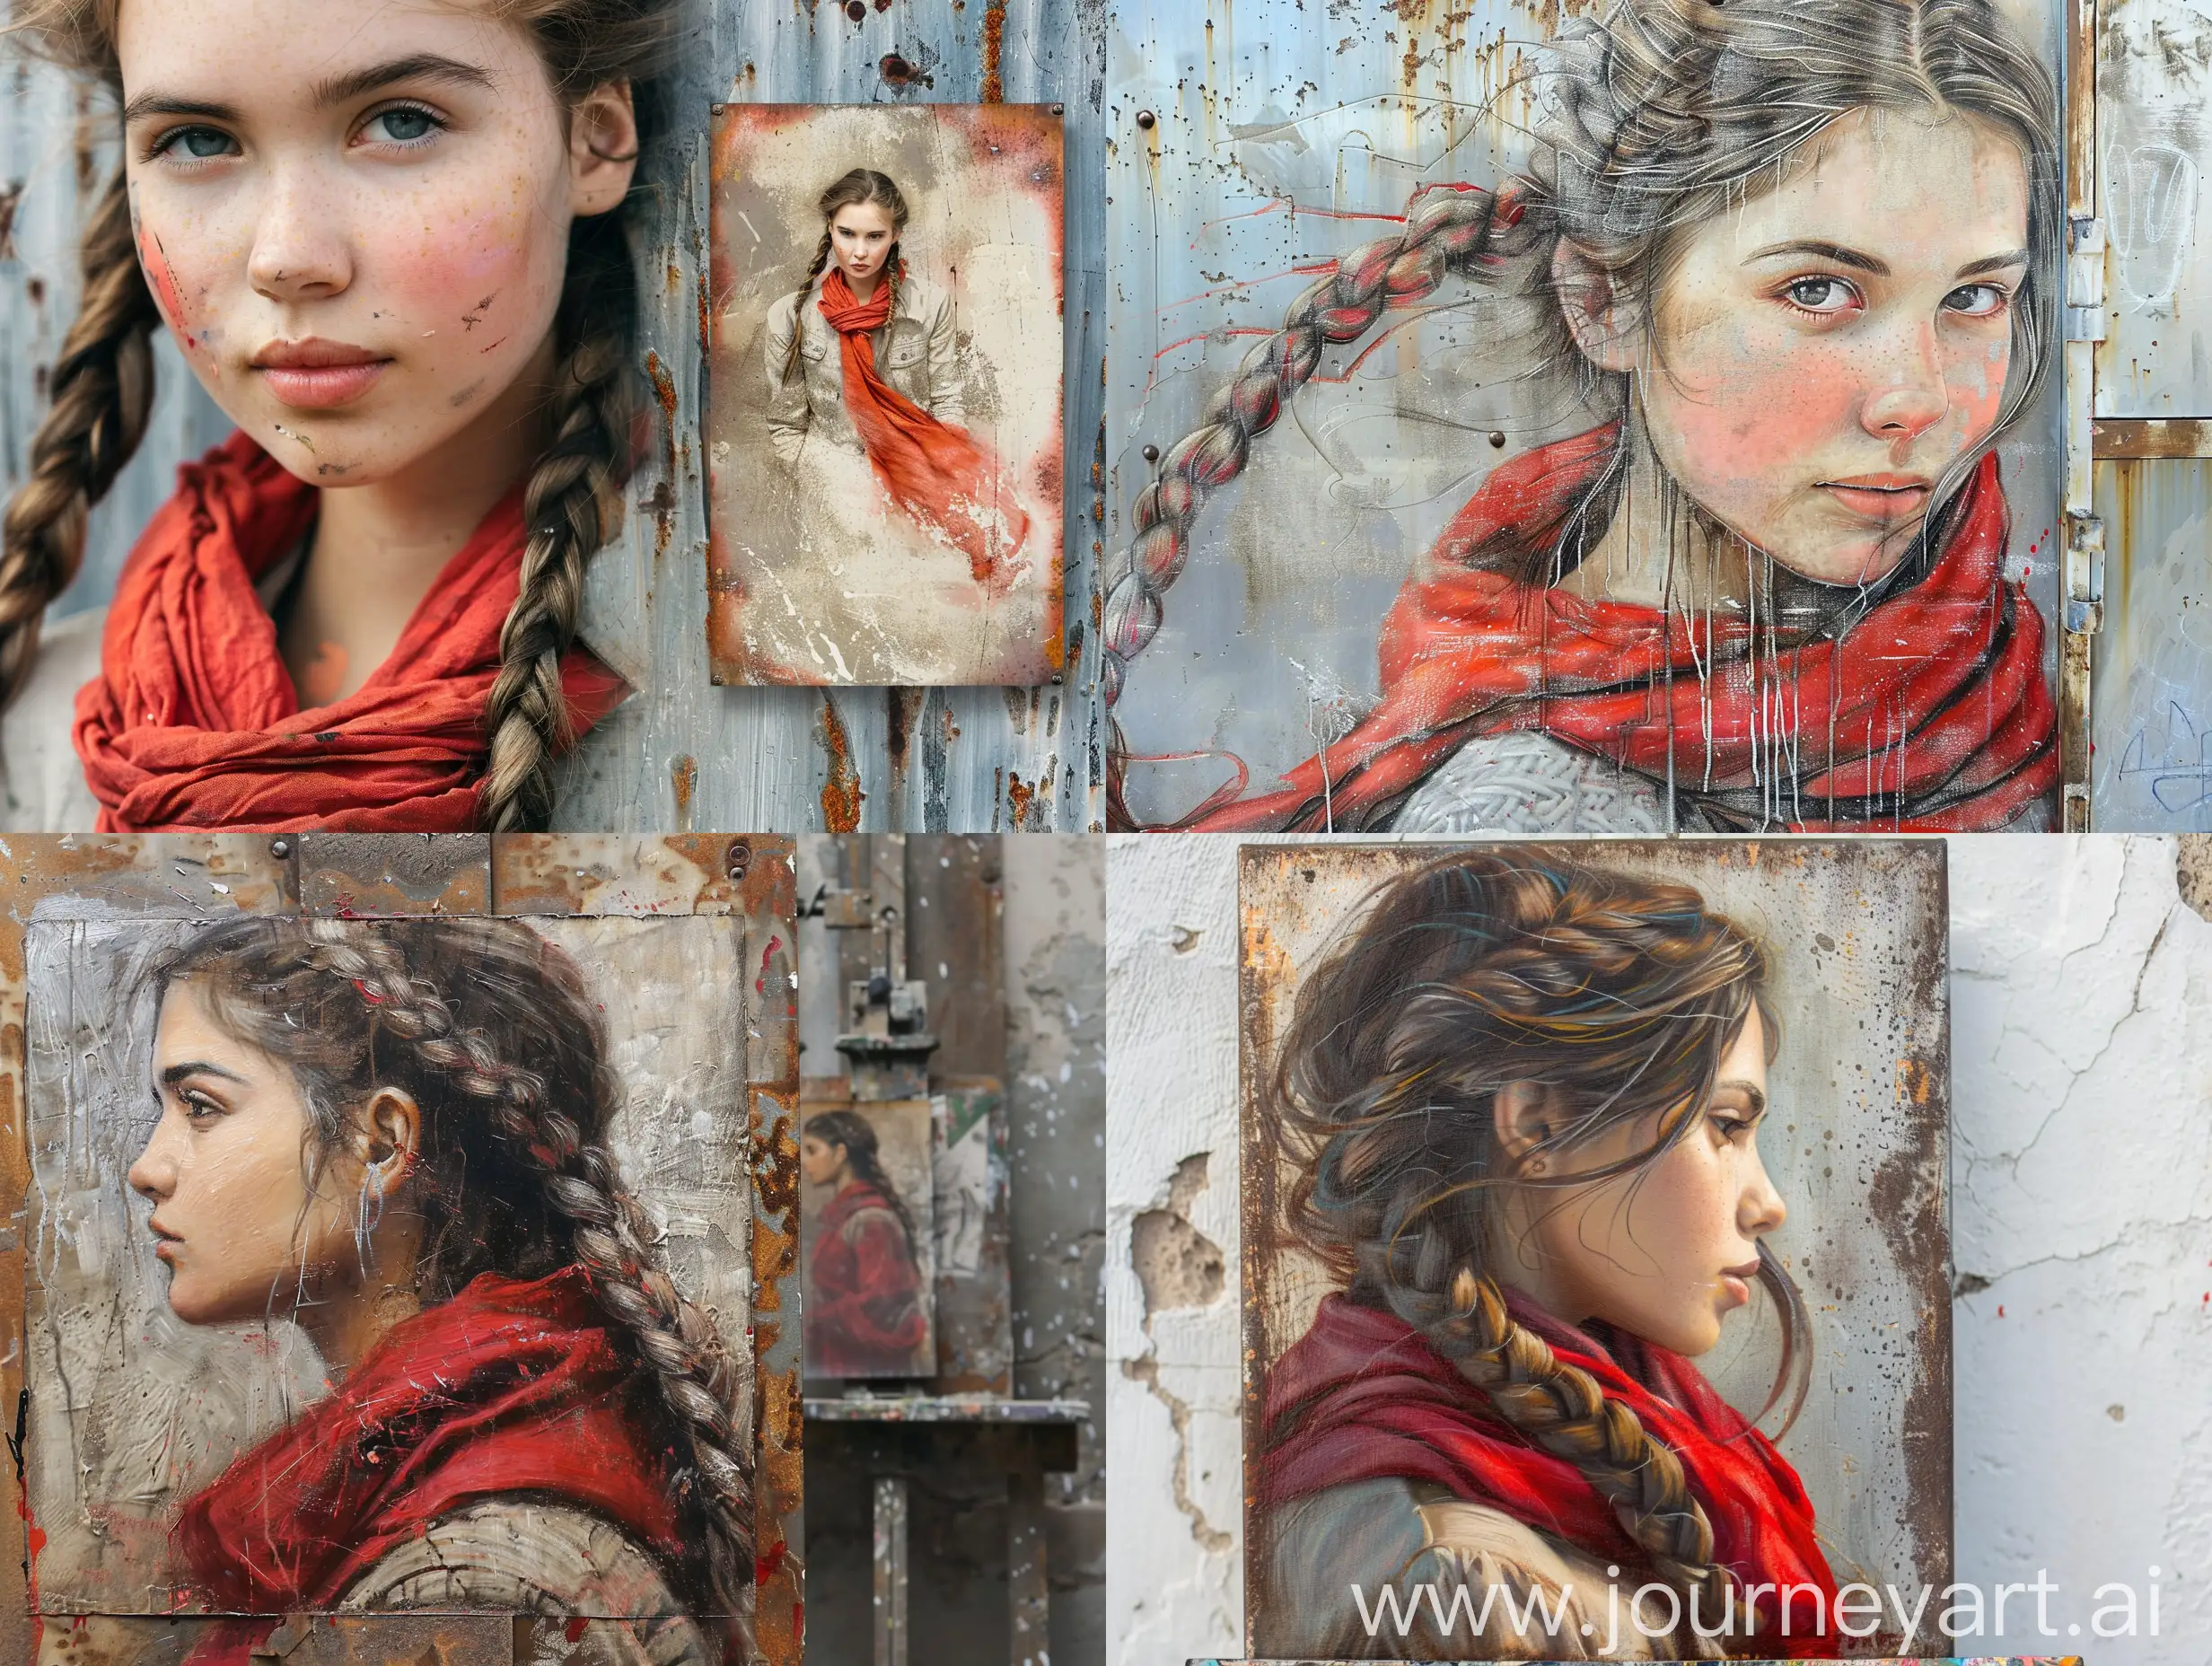 Girl-with-Braided-Hair-Painting-on-Metal-with-Red-Scarf